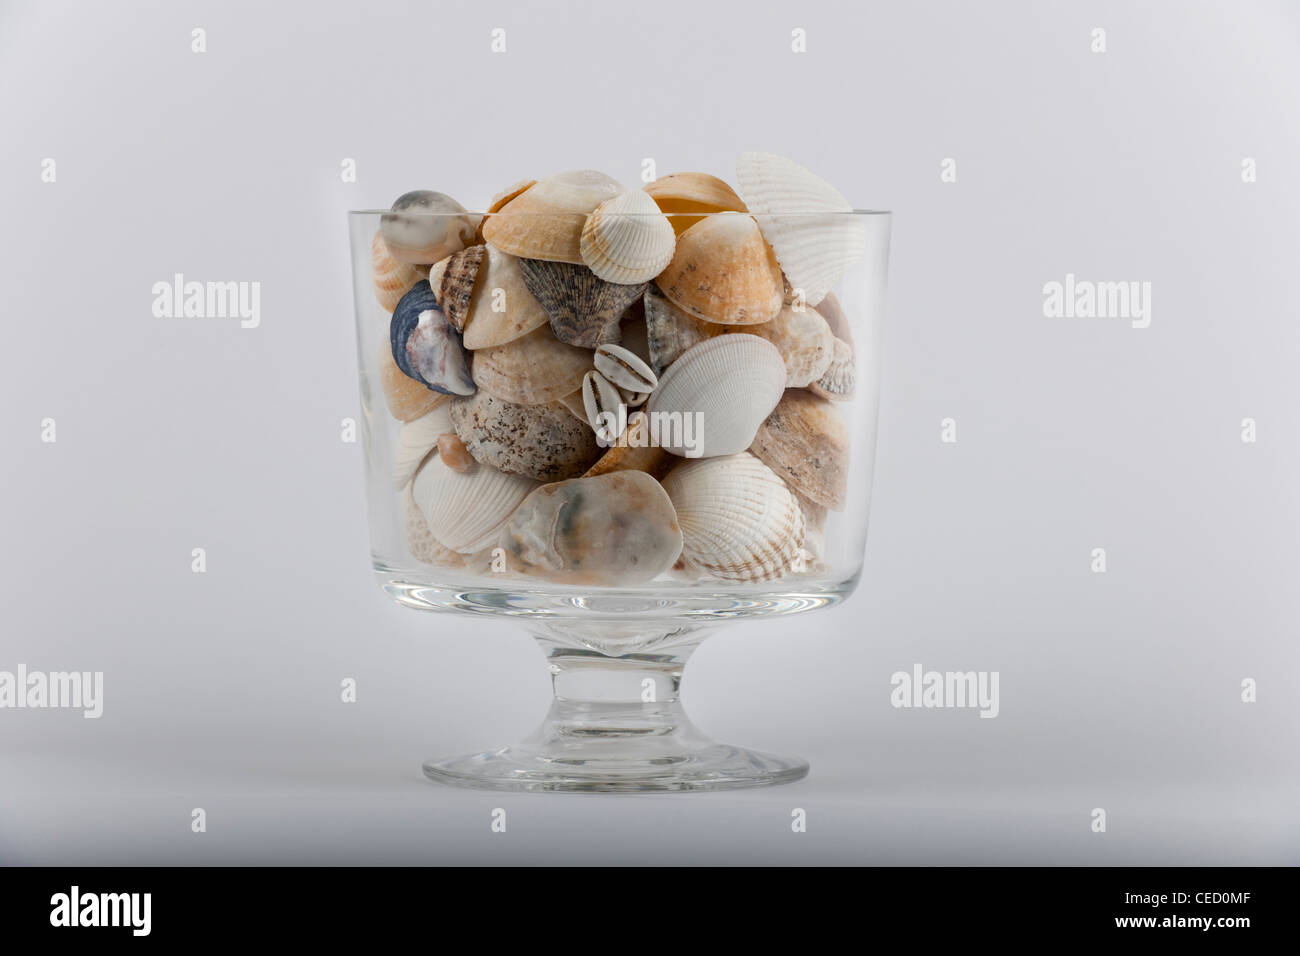 Sea shells and a piece of coral in a glass vase with a textured backcloth Stock Photo